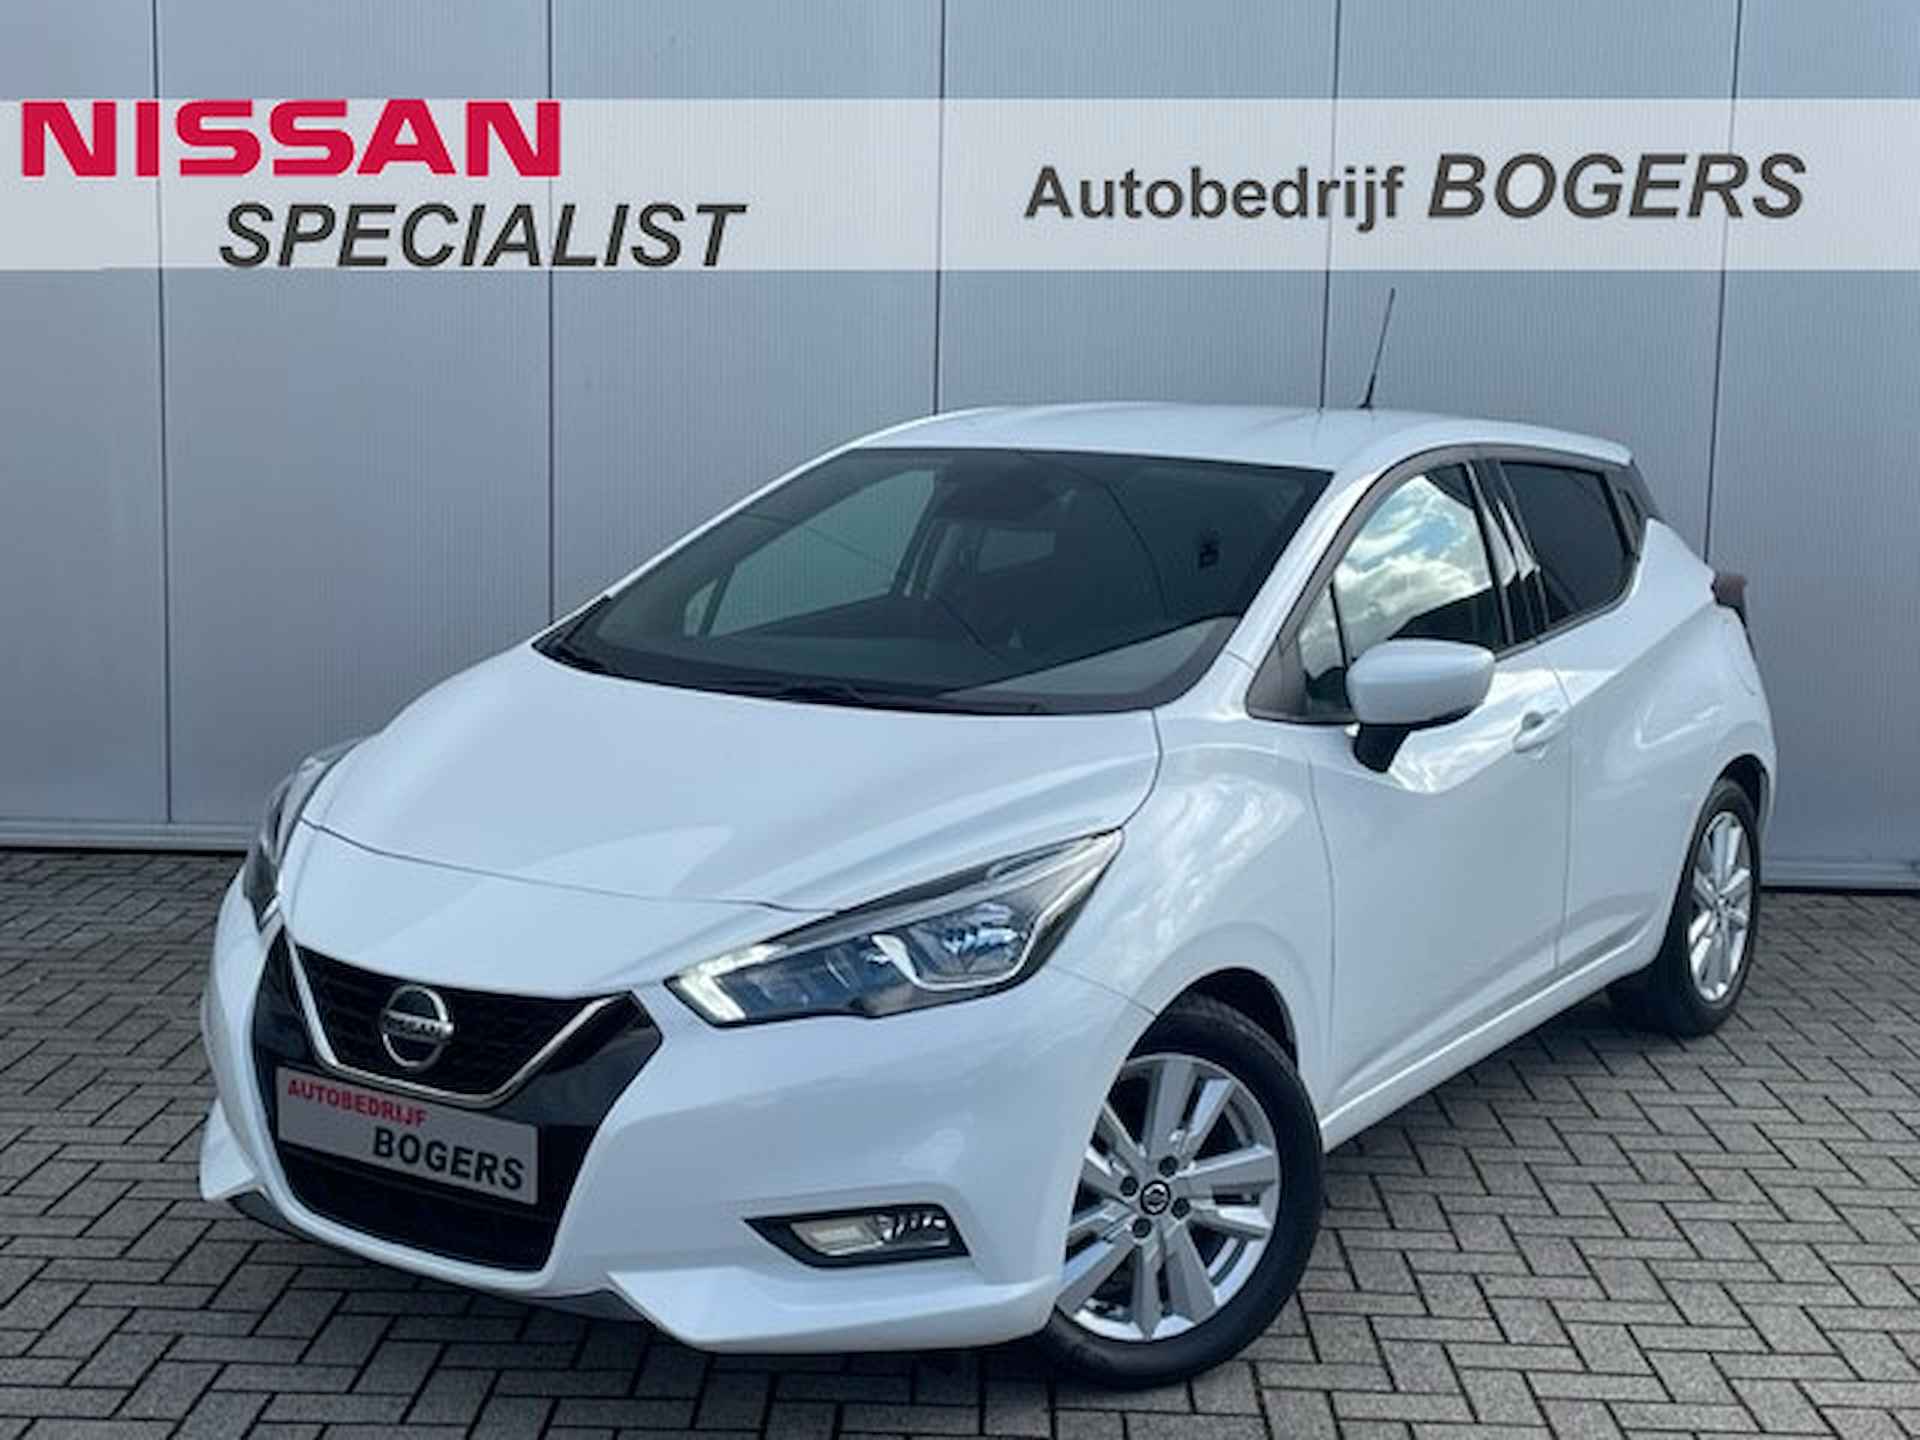 Nissan Micra 1.0 IG-T N-Connecta Automaat Navigatie, Airco, Cruise Control, 16"Lm, Achteruitrijcamera - 1/23